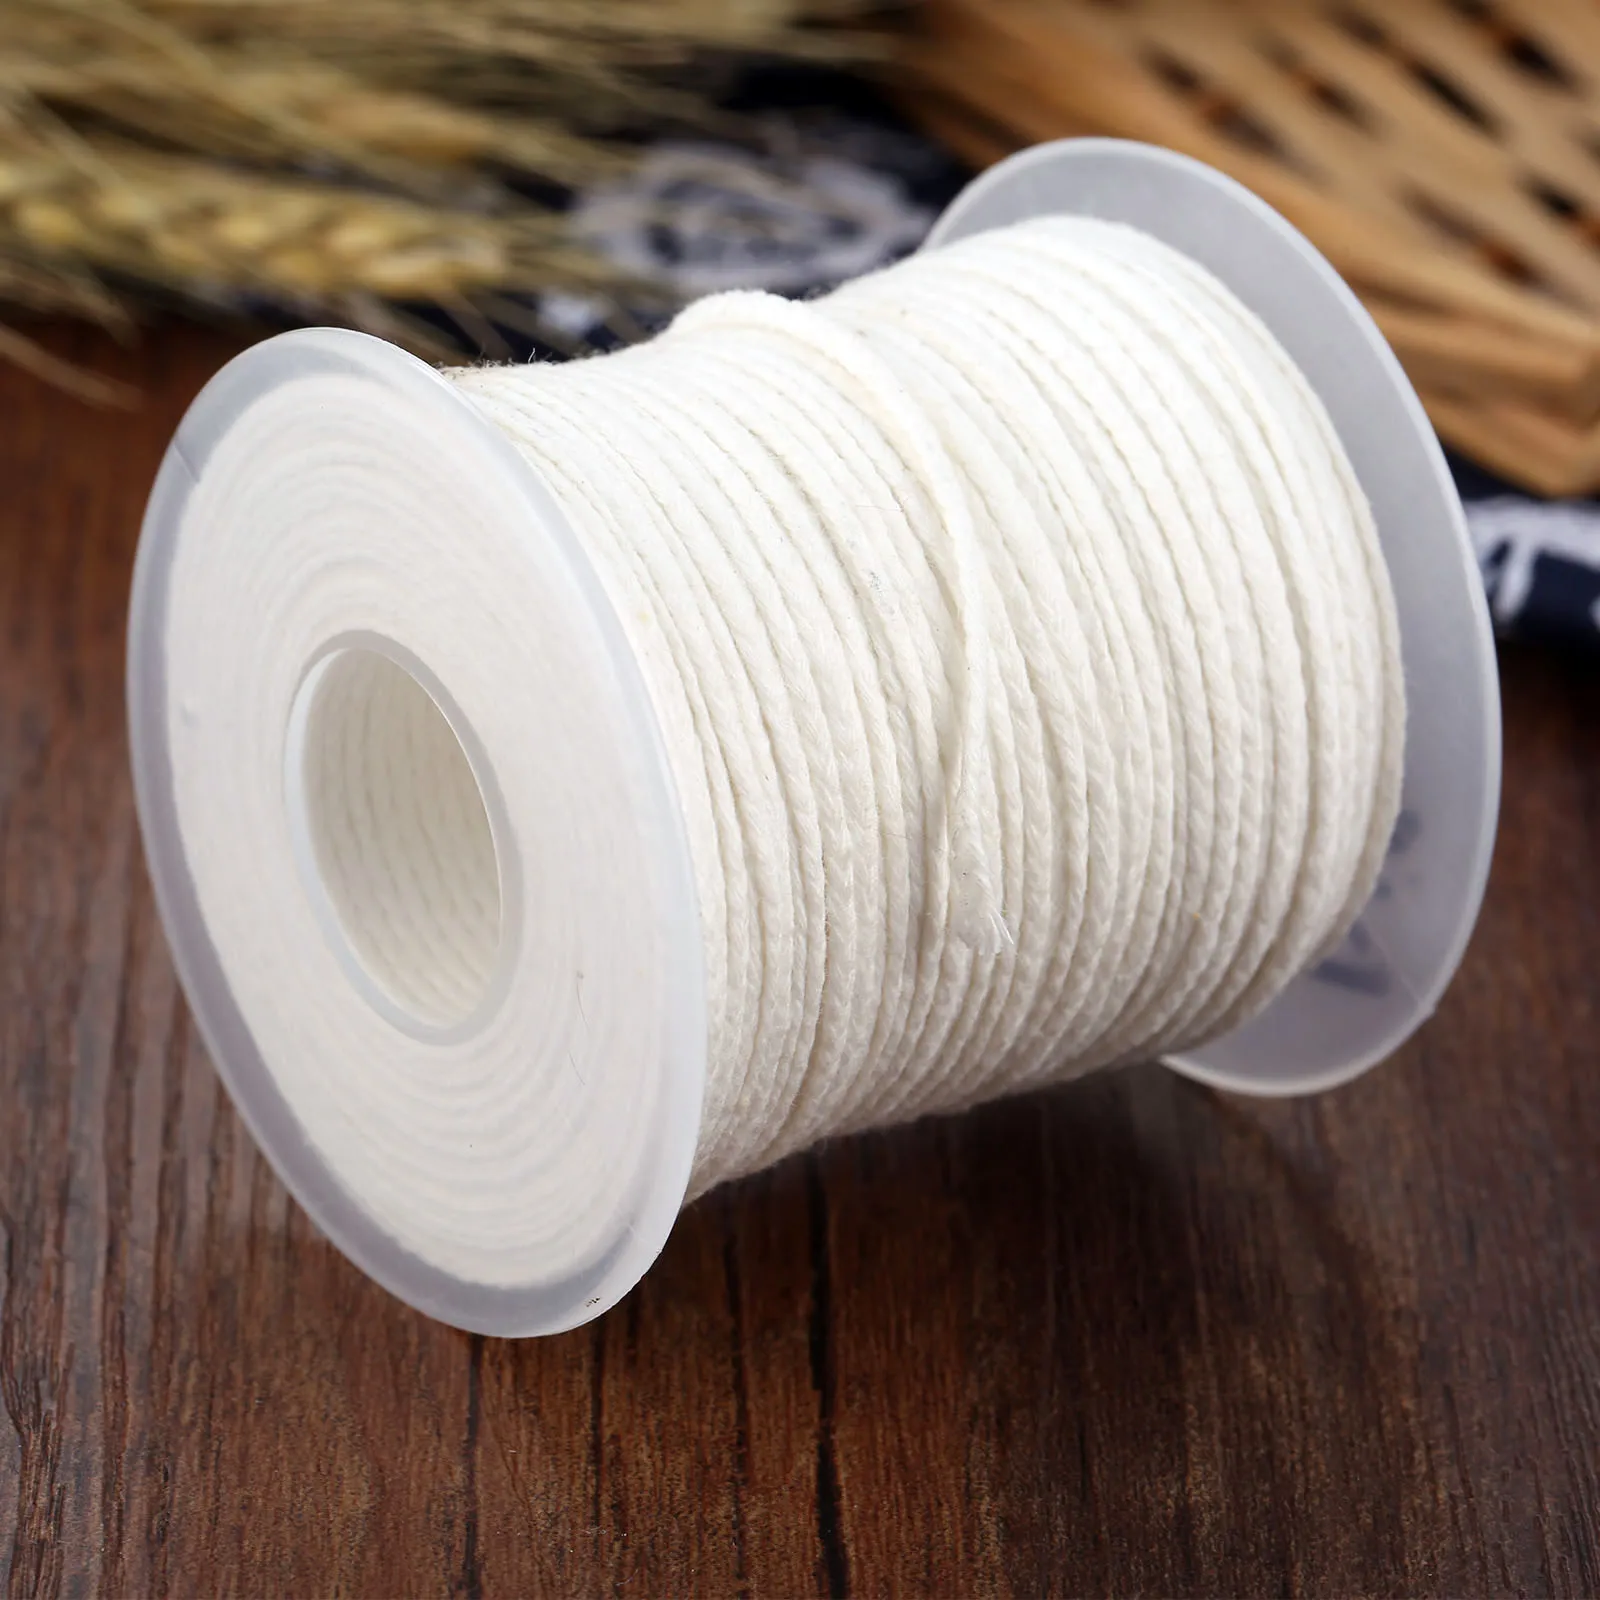 EXCEART 1 Roll Beeswax Wick Braided Wick Spool Wicks for Candlemaking DIY  Use Wick Material Candle Making Spool Beeswax Core Wick Fiber Wick Organic